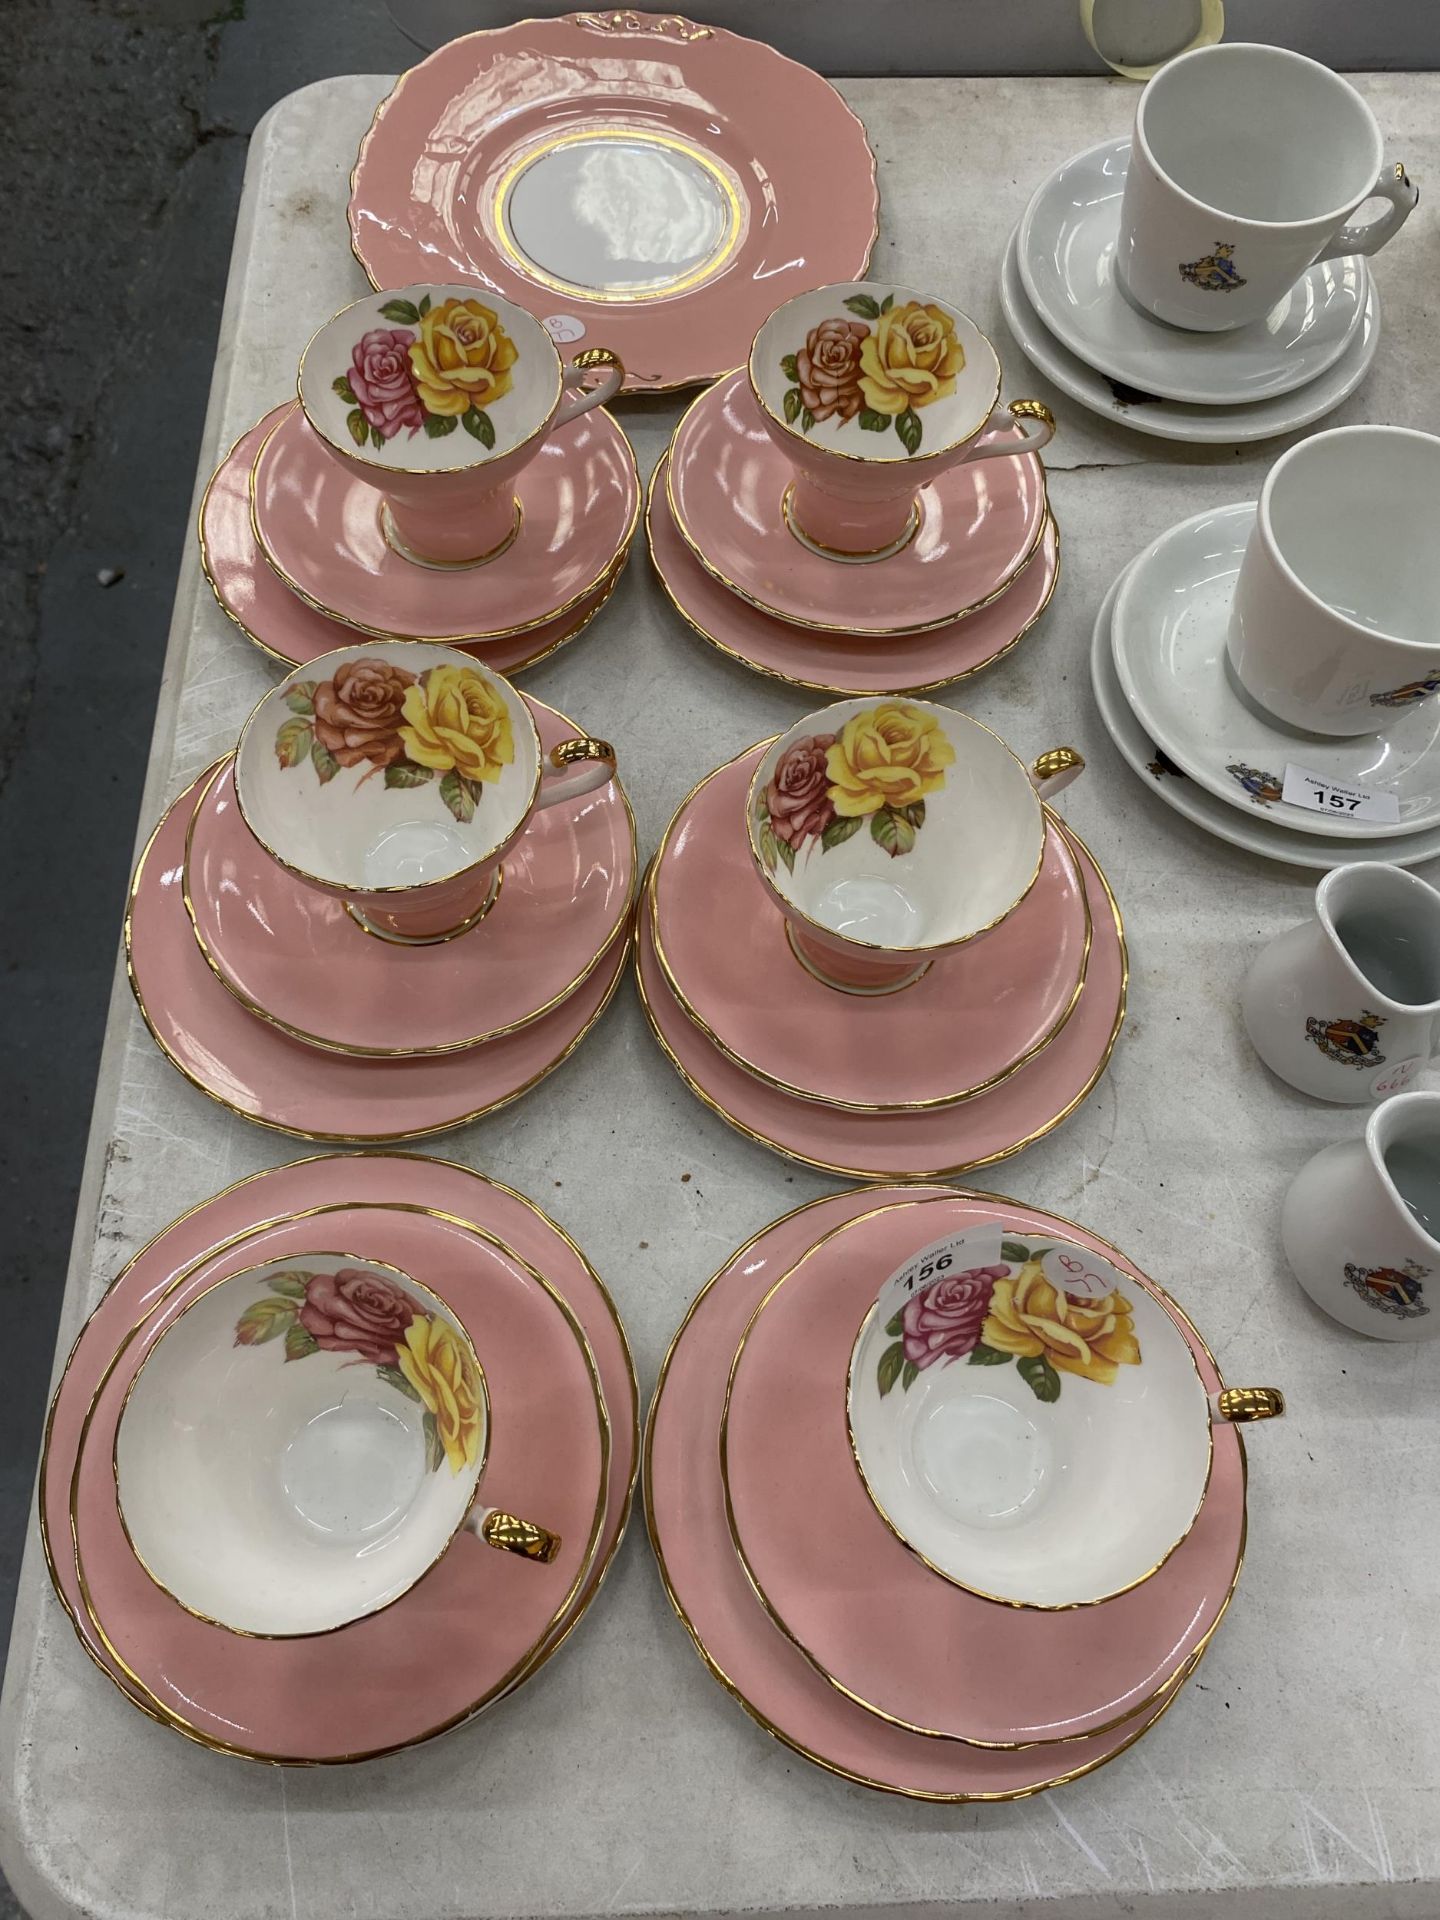 SIX VINTAGE AYNSLEY TRIOS PLUS A CAKE PLATE WITH A PINK AND ROSE PATTERN